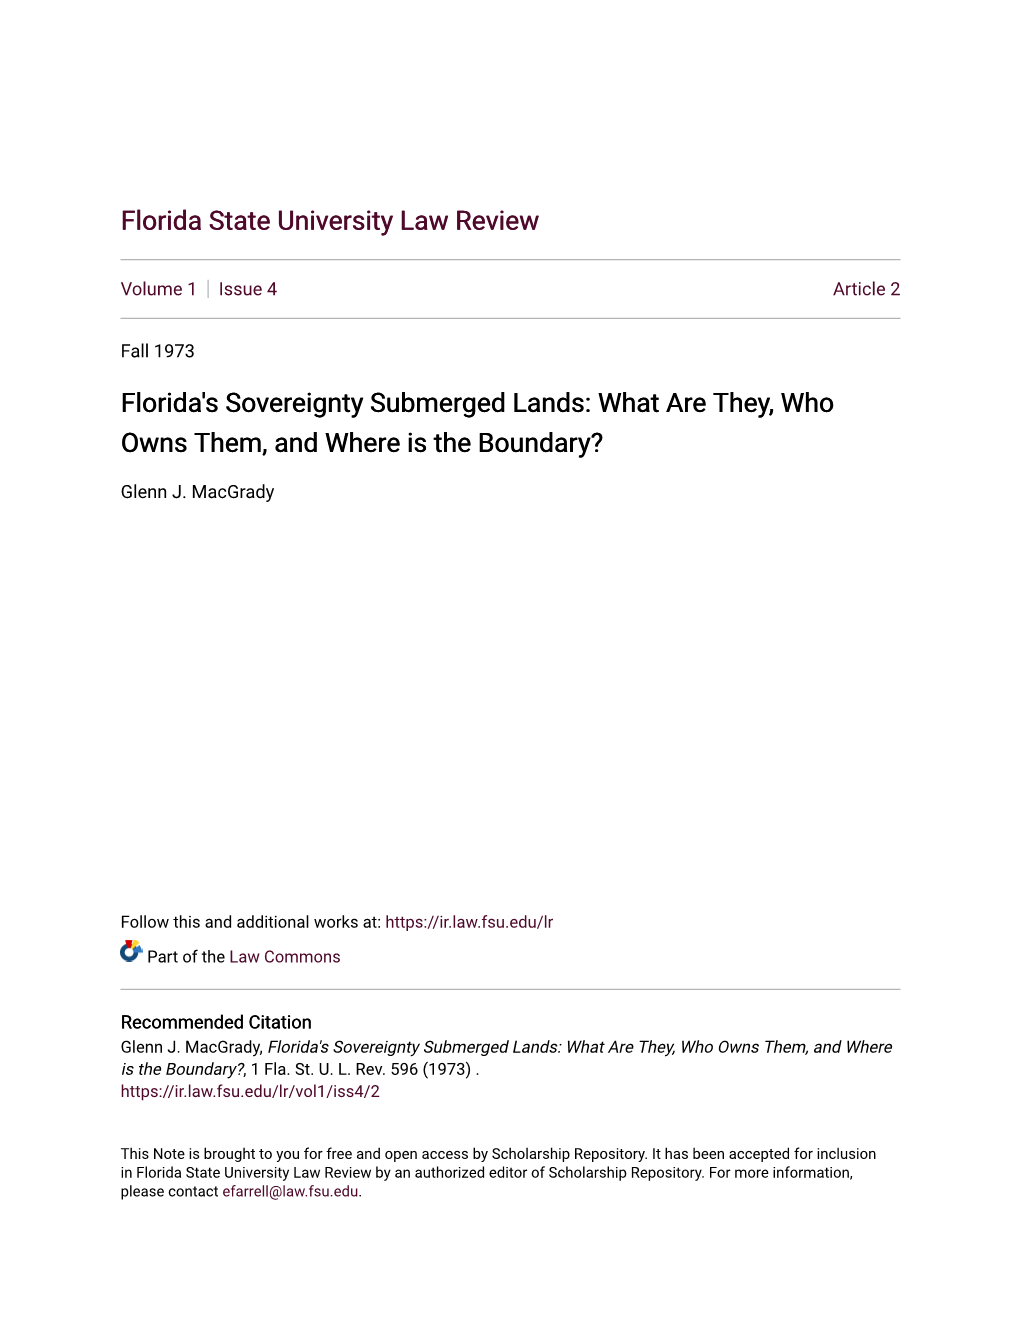 Florida's Sovereignty Submerged Lands: What Are They, Who Owns Them, and Where Is the Boundary?